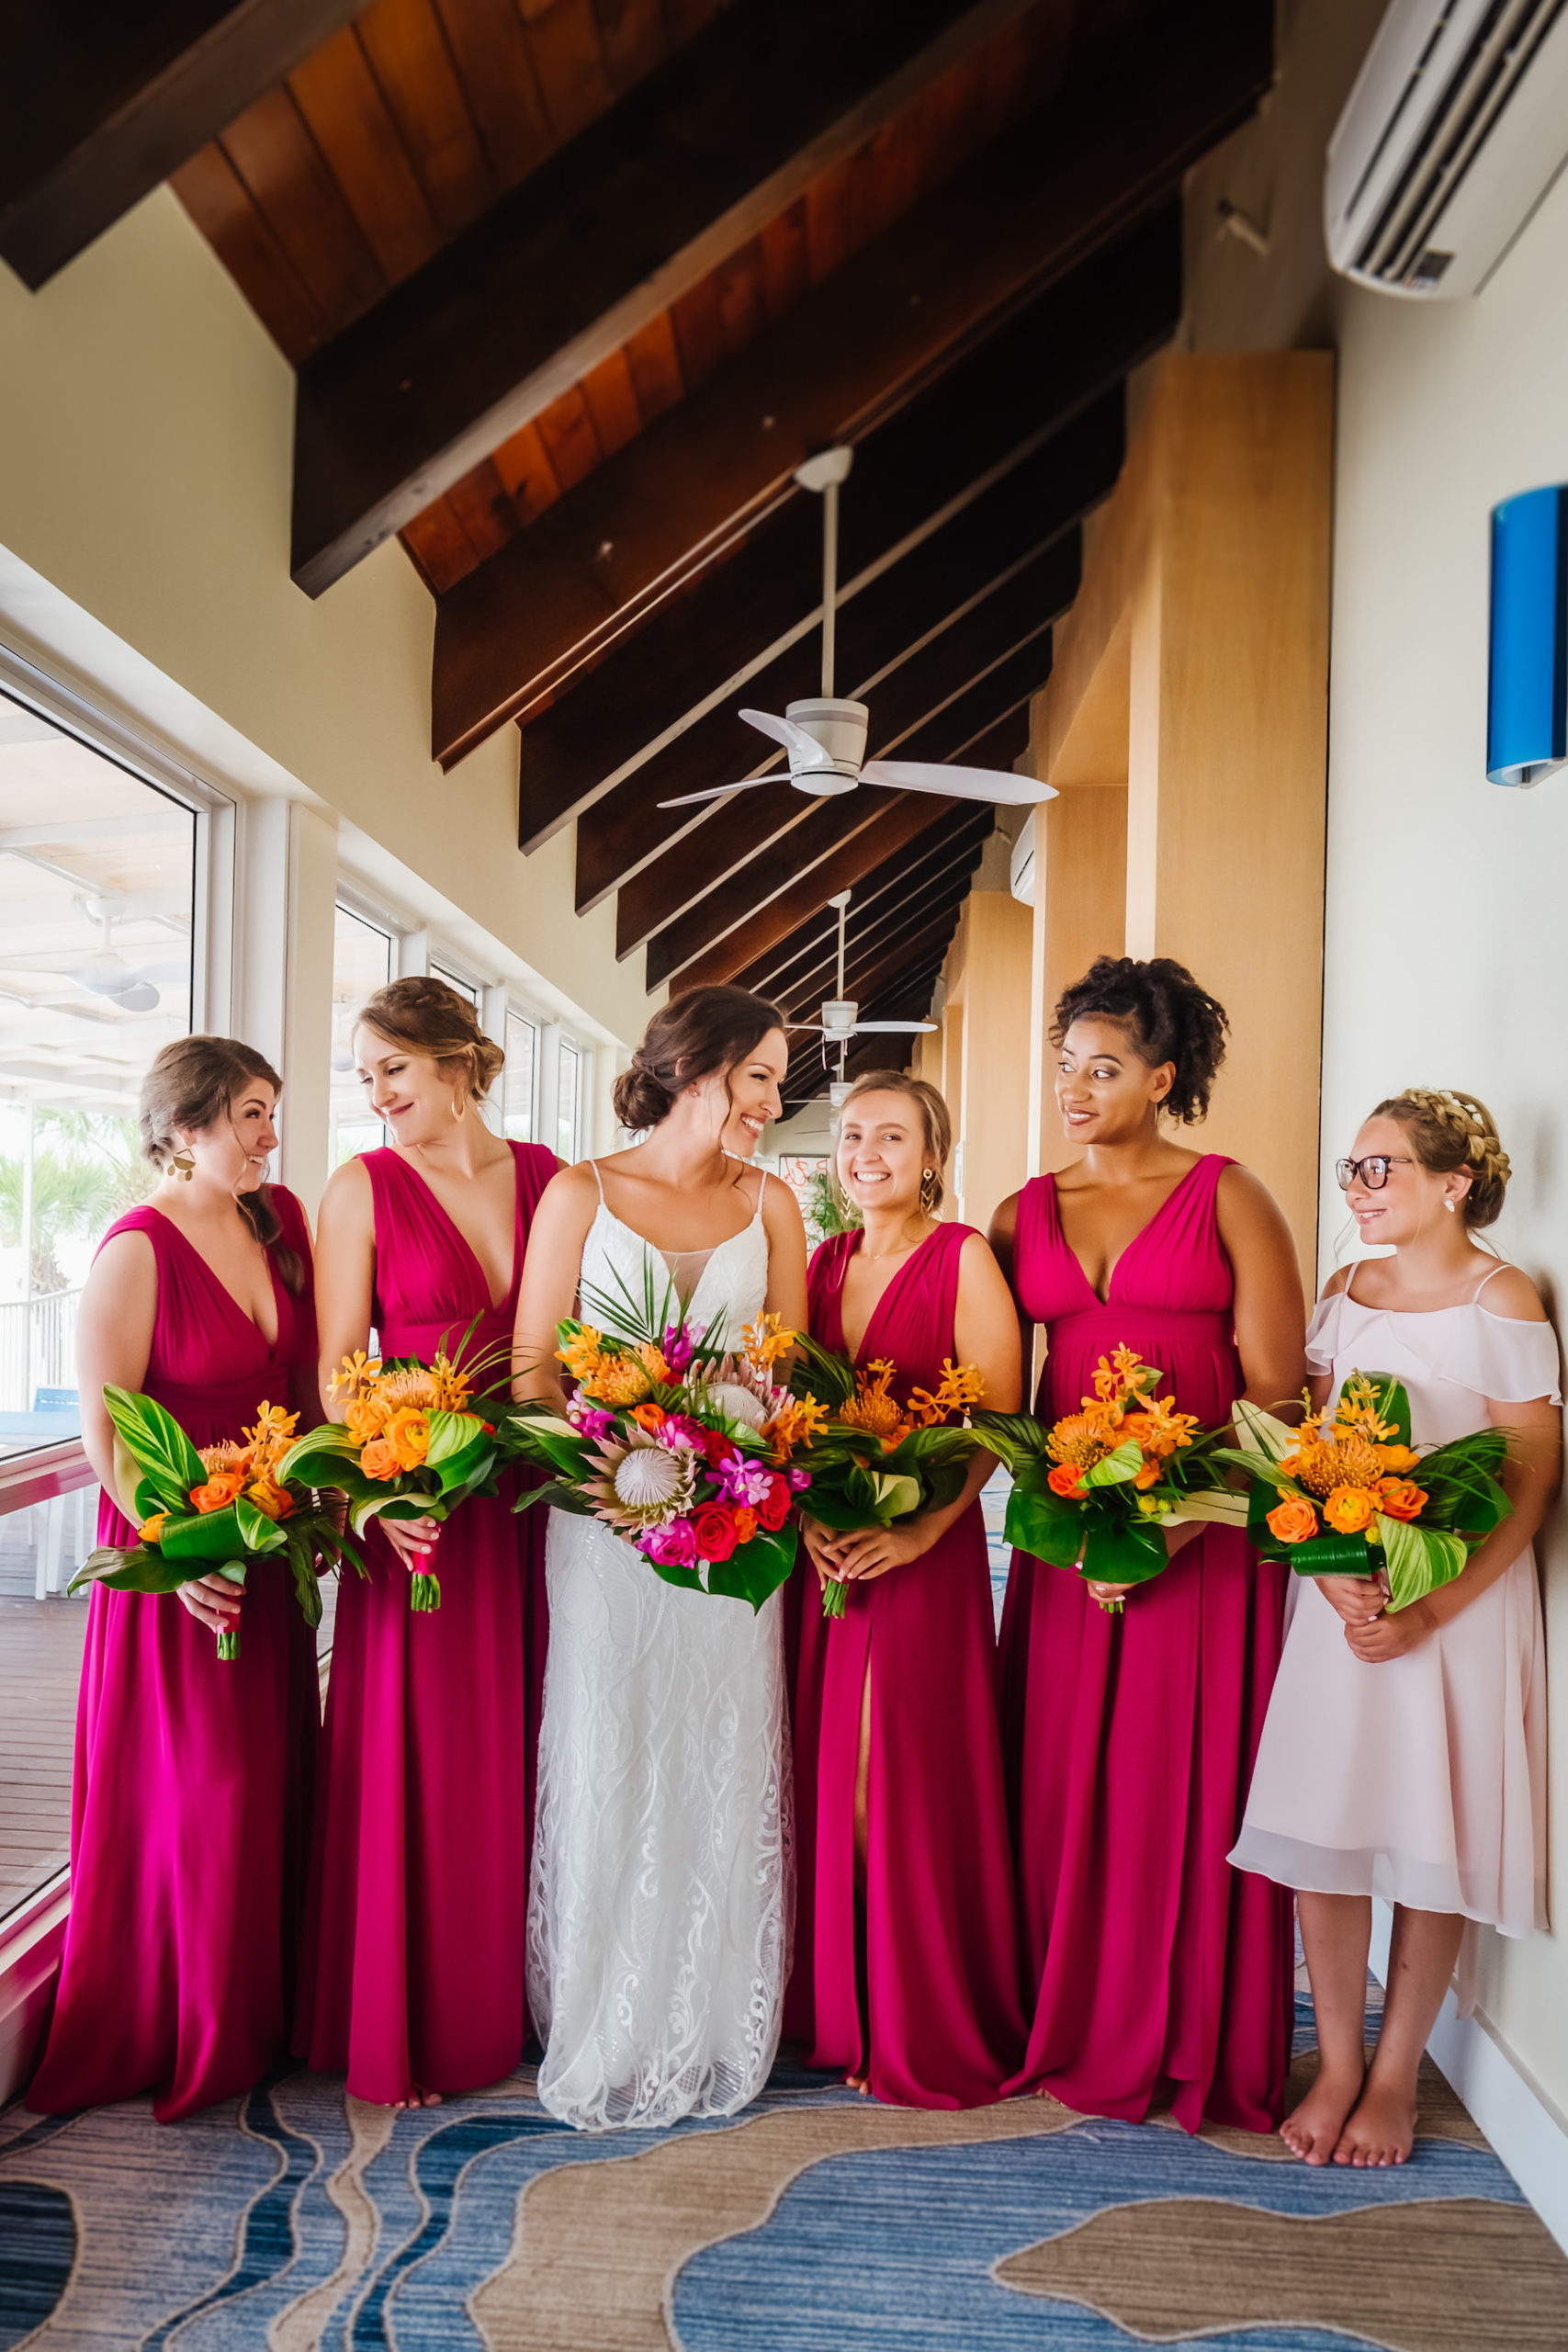 Florida Bride with Bridesmaids in Matching Magenta Dresses Holding Tropical Monstera Palm Leaves, Orange Flowers, King Proteas, Pink and Orange Roses Floral Bouquets | Tampa Bay Waterfront Beach Hotel Wedding Venue Hilton Clearwater Beach